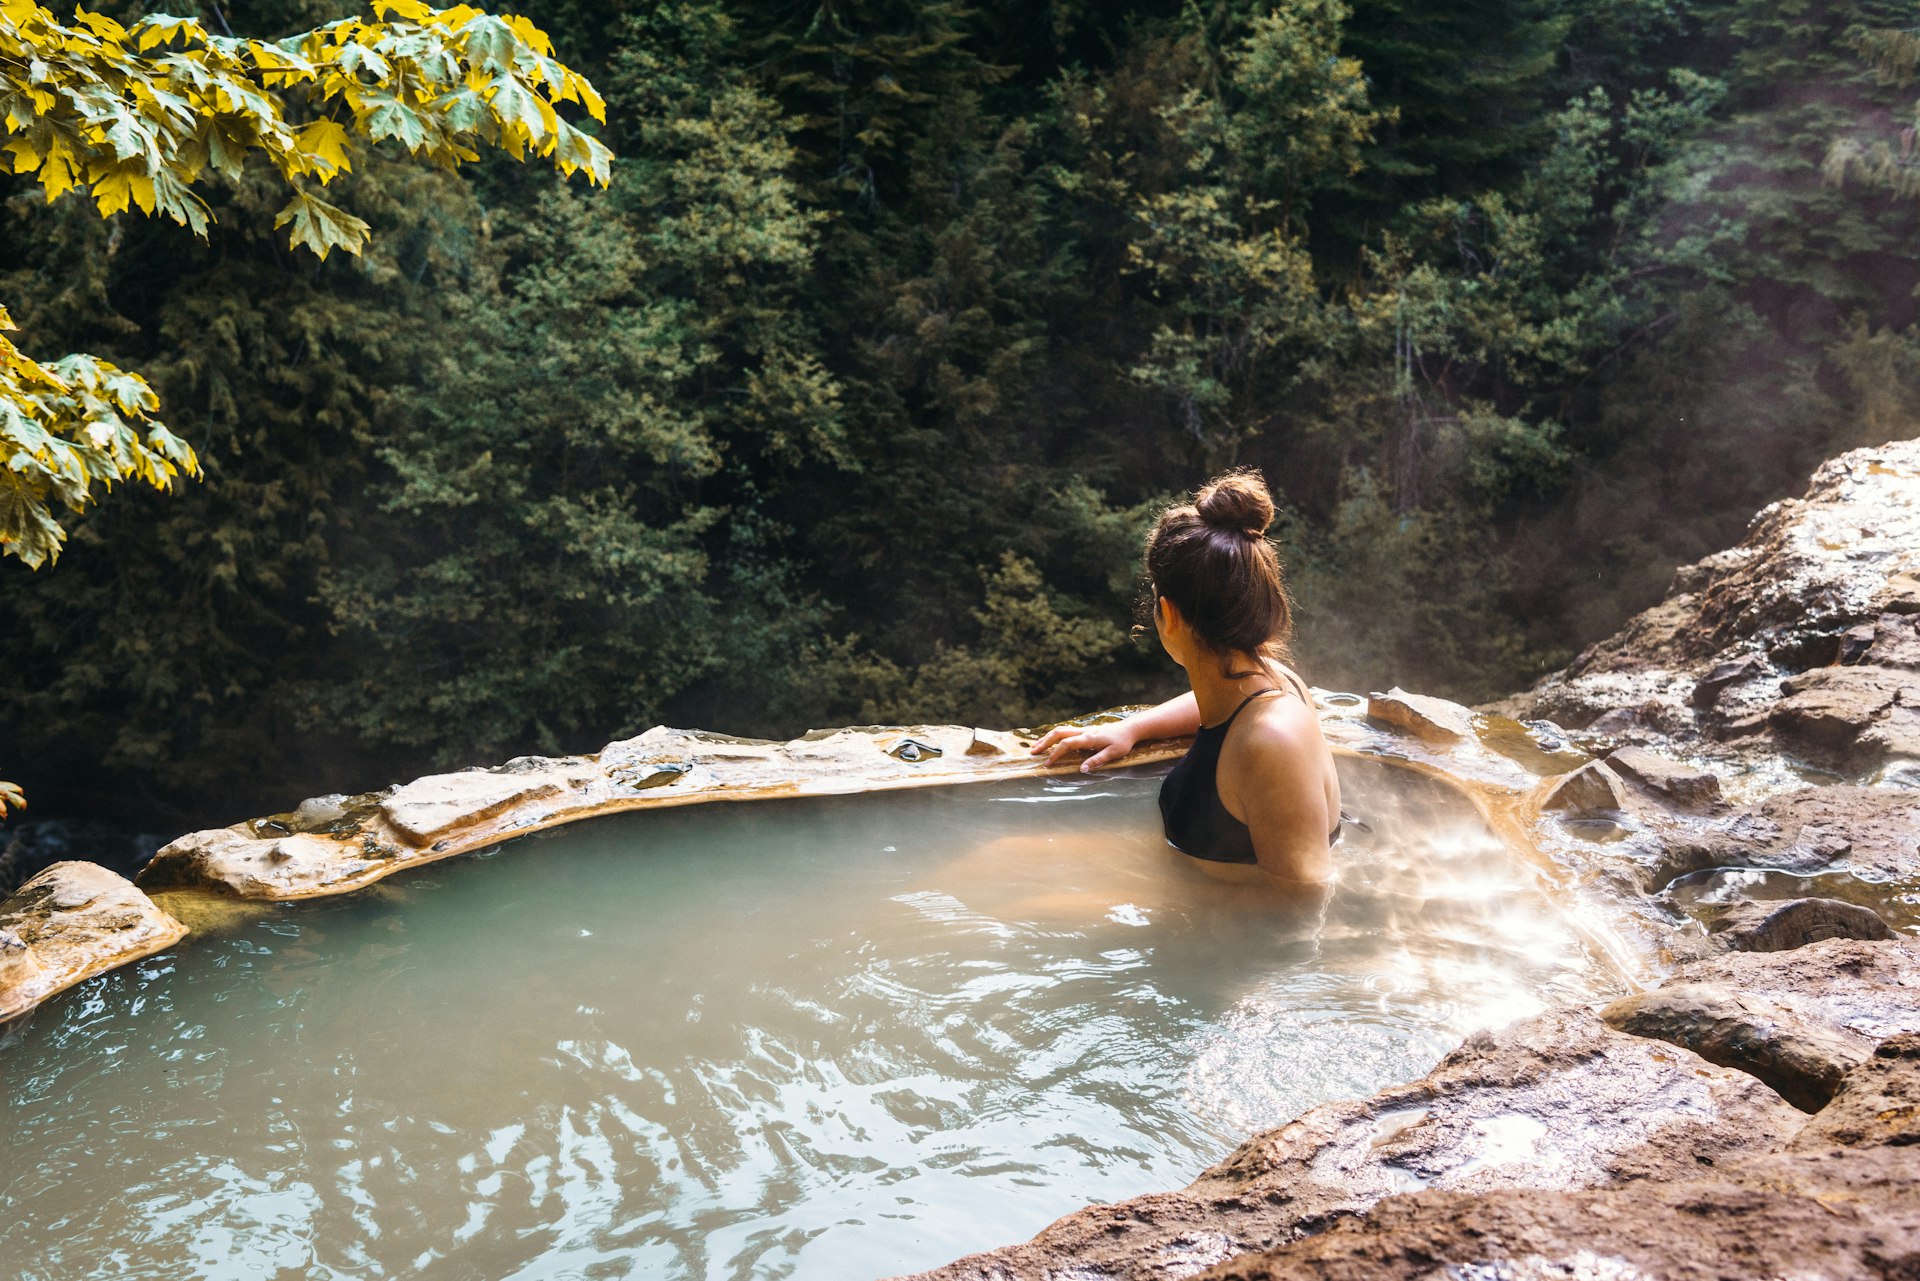 A woman sits in a hot spring surrounded by woodland